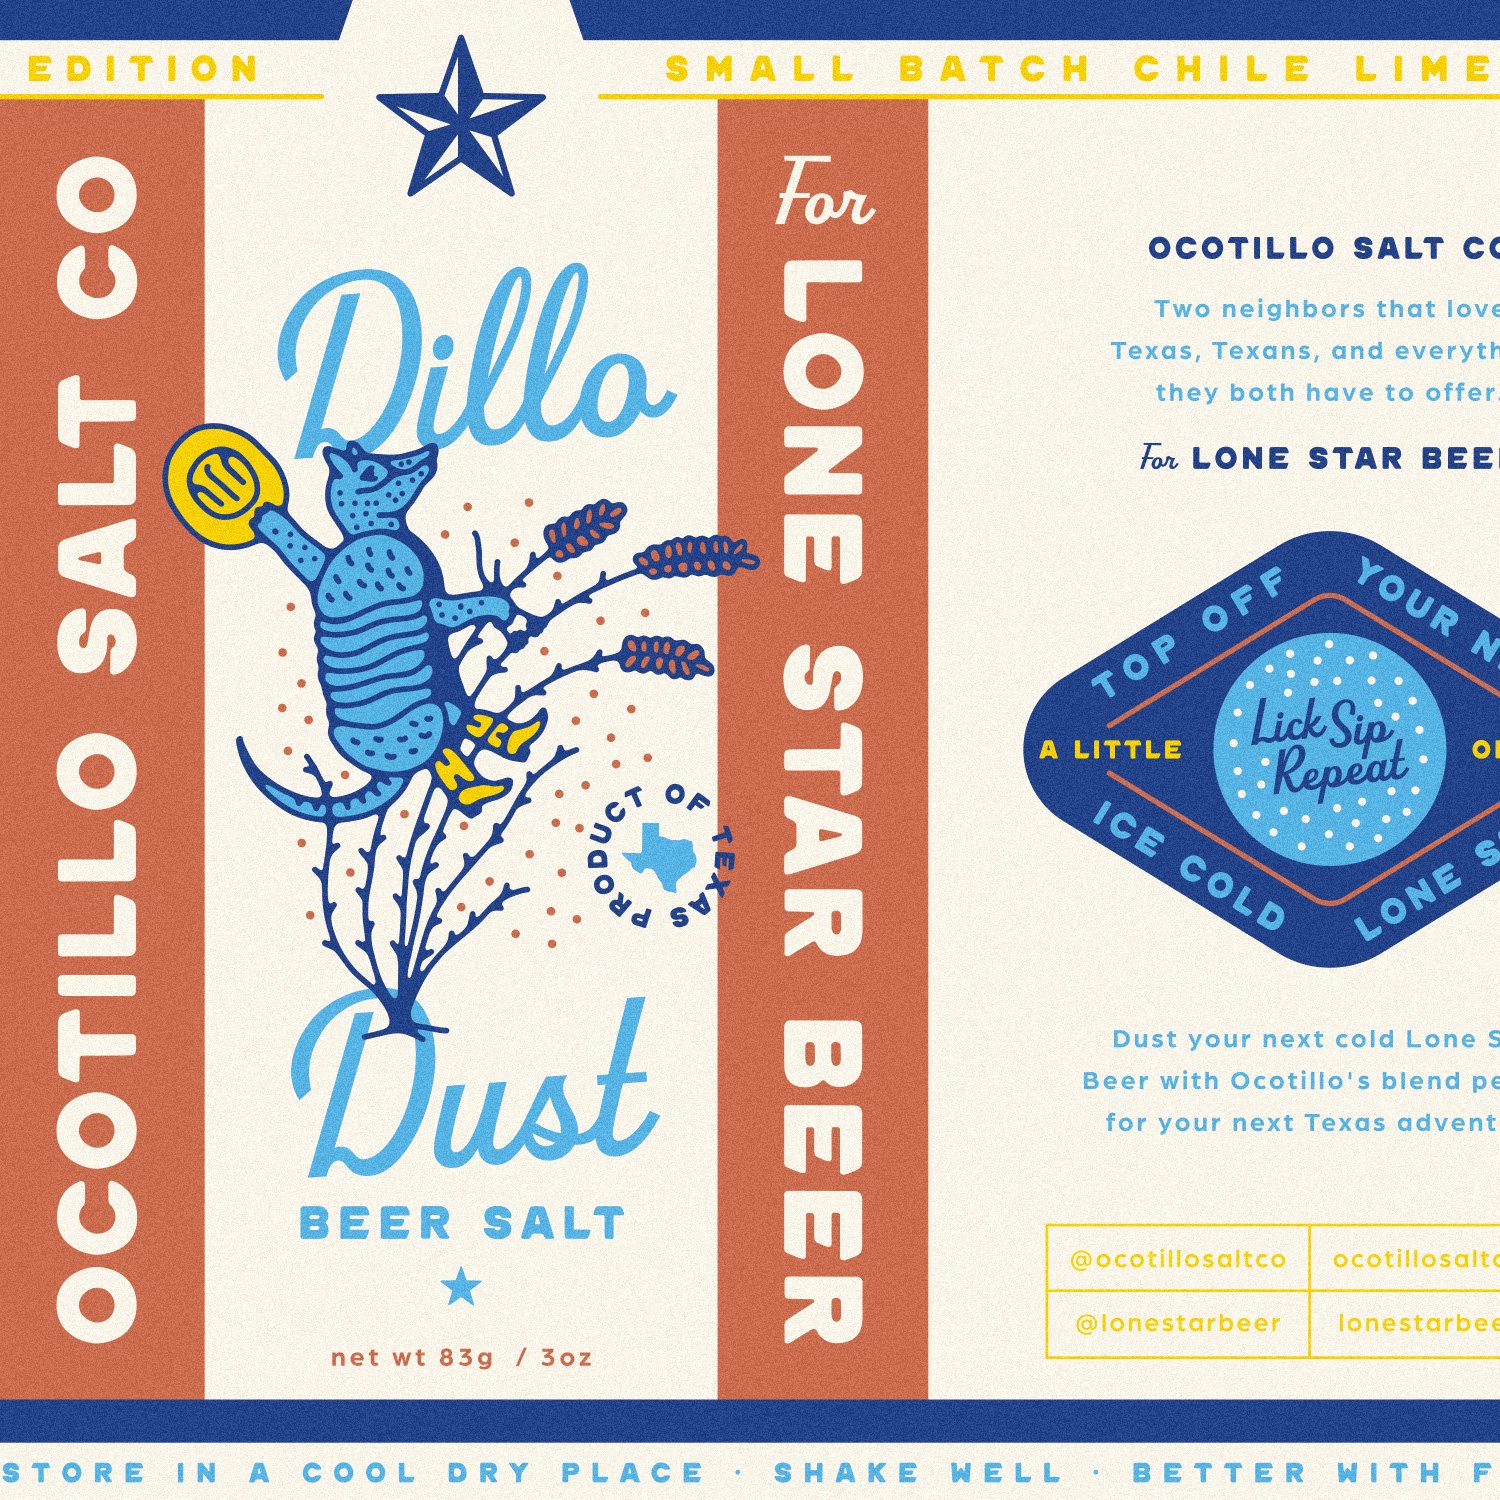  Ocotillo Salt Co x Lone Star Beer packaging design by Cactus Country. 